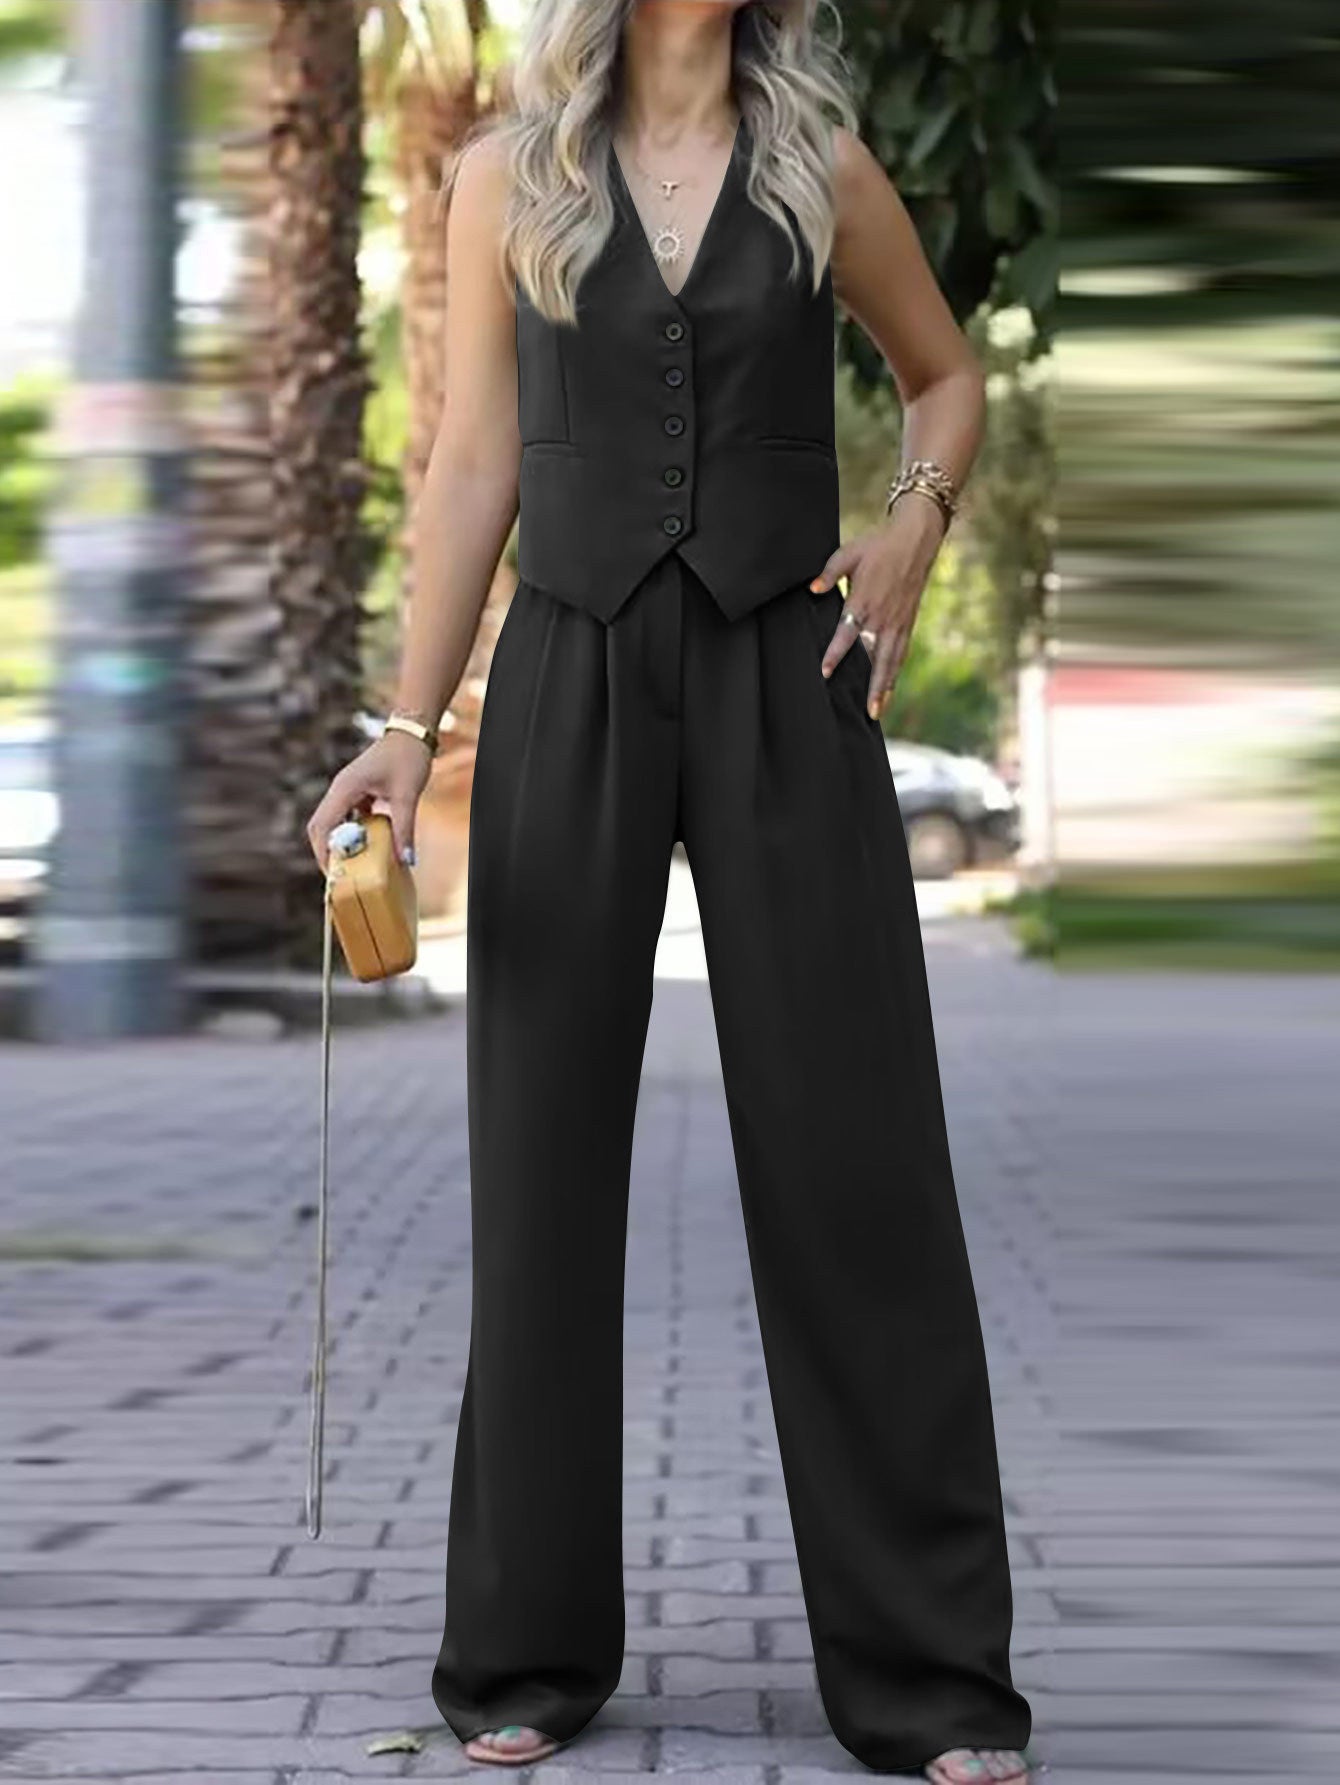 V-Neck Sleeveless Vest and Drooping Wide-Leg Pants Suit